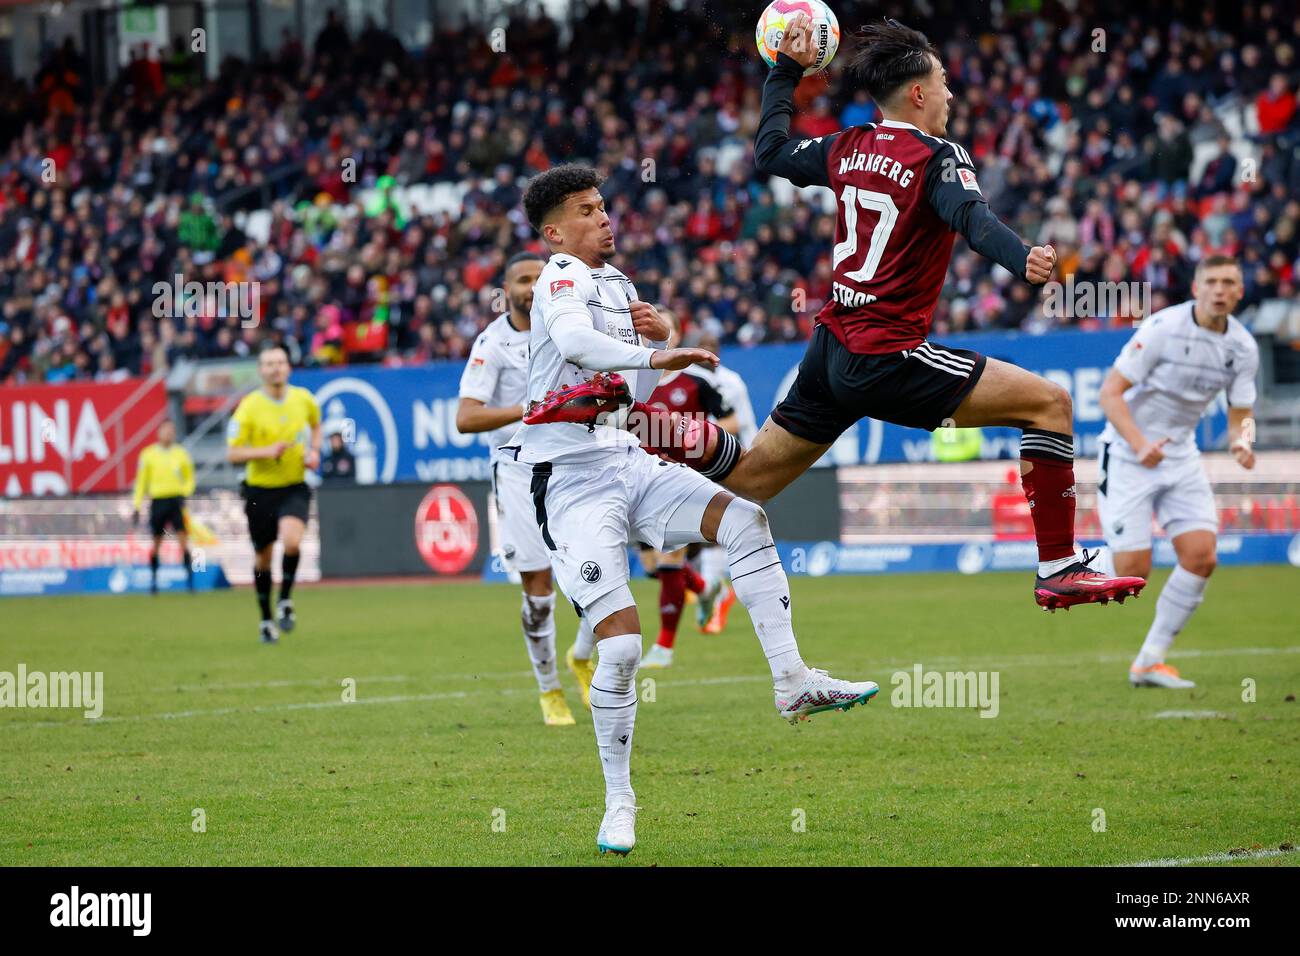 Germany. 25th Feb, 2023. Nuremberg, Germany. 25th Feb, 2023. Soccer: 2nd Bundesliga, 1. FC Nürnberg - SV Sandhausen, Matchday 22, Max-Morlock-Stadion. Sandhausen's Chima Okoroji (l-r) and Nuremberg's Jens Castrop fight for the ball. Credit: Daniel Löb/dpa - IMPORTANT NOTE: In accordance with the requirements of the DFL Deutsche Fußball Liga and the DFB Deutscher Fußball-Bund, it is prohibited to use or have used photographs taken in the stadium and/or of the match in the form of sequence pictures and/or video-like photo series./dpa/Alamy Live News Credit: dpa picture alliance/Alamy Live News Stock Photo